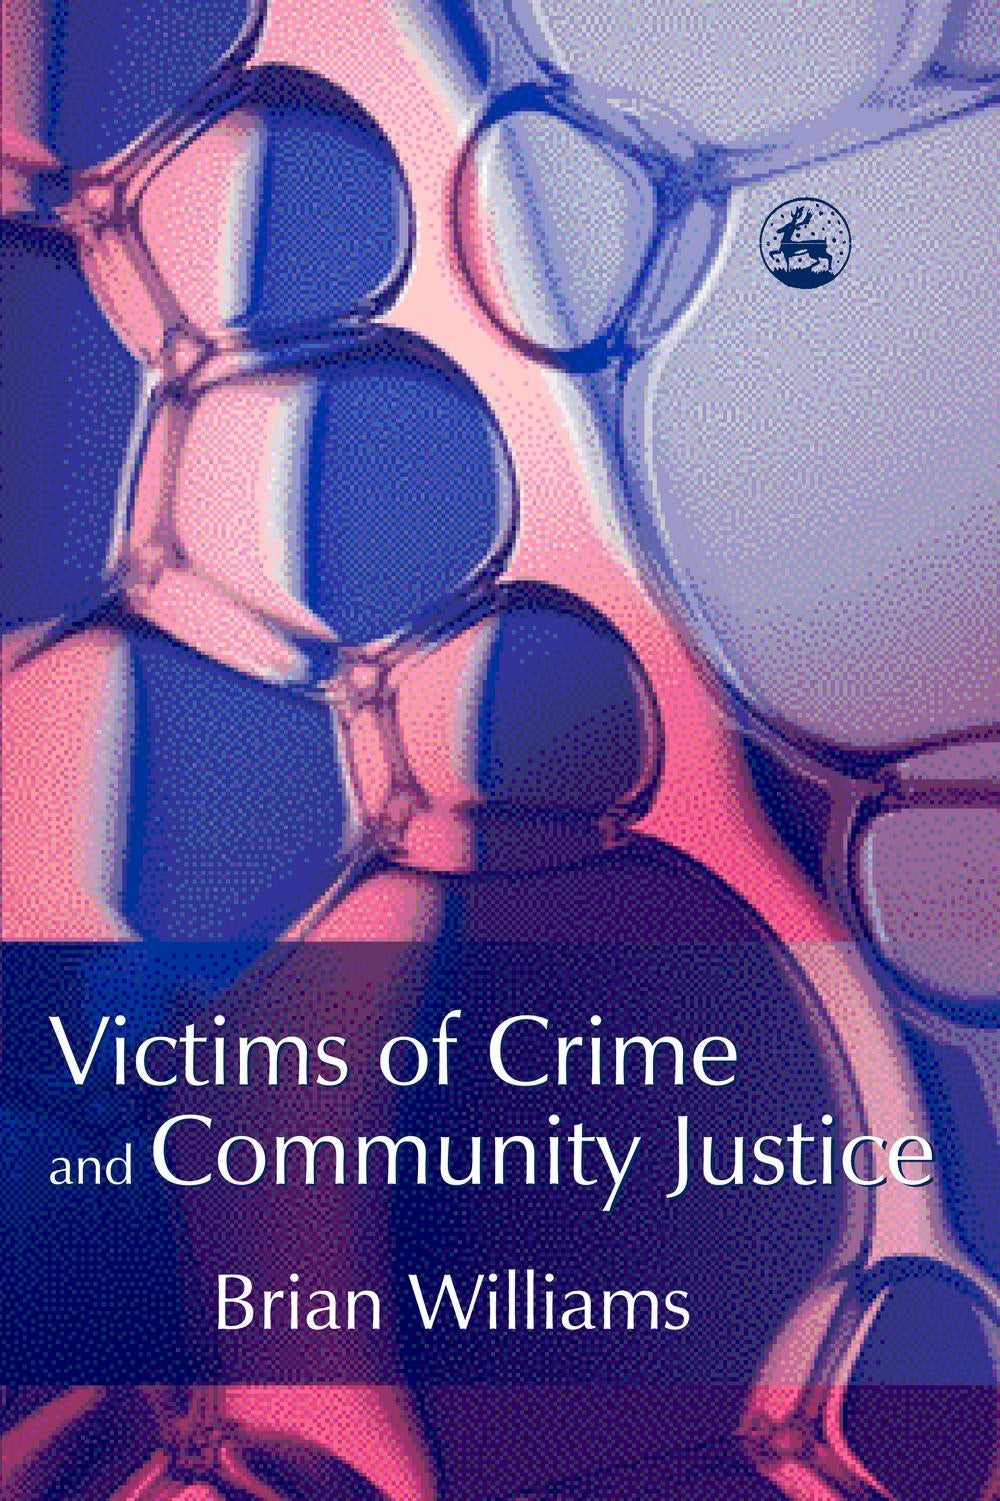 Victims of Crime and Community Justice by Brian Williams